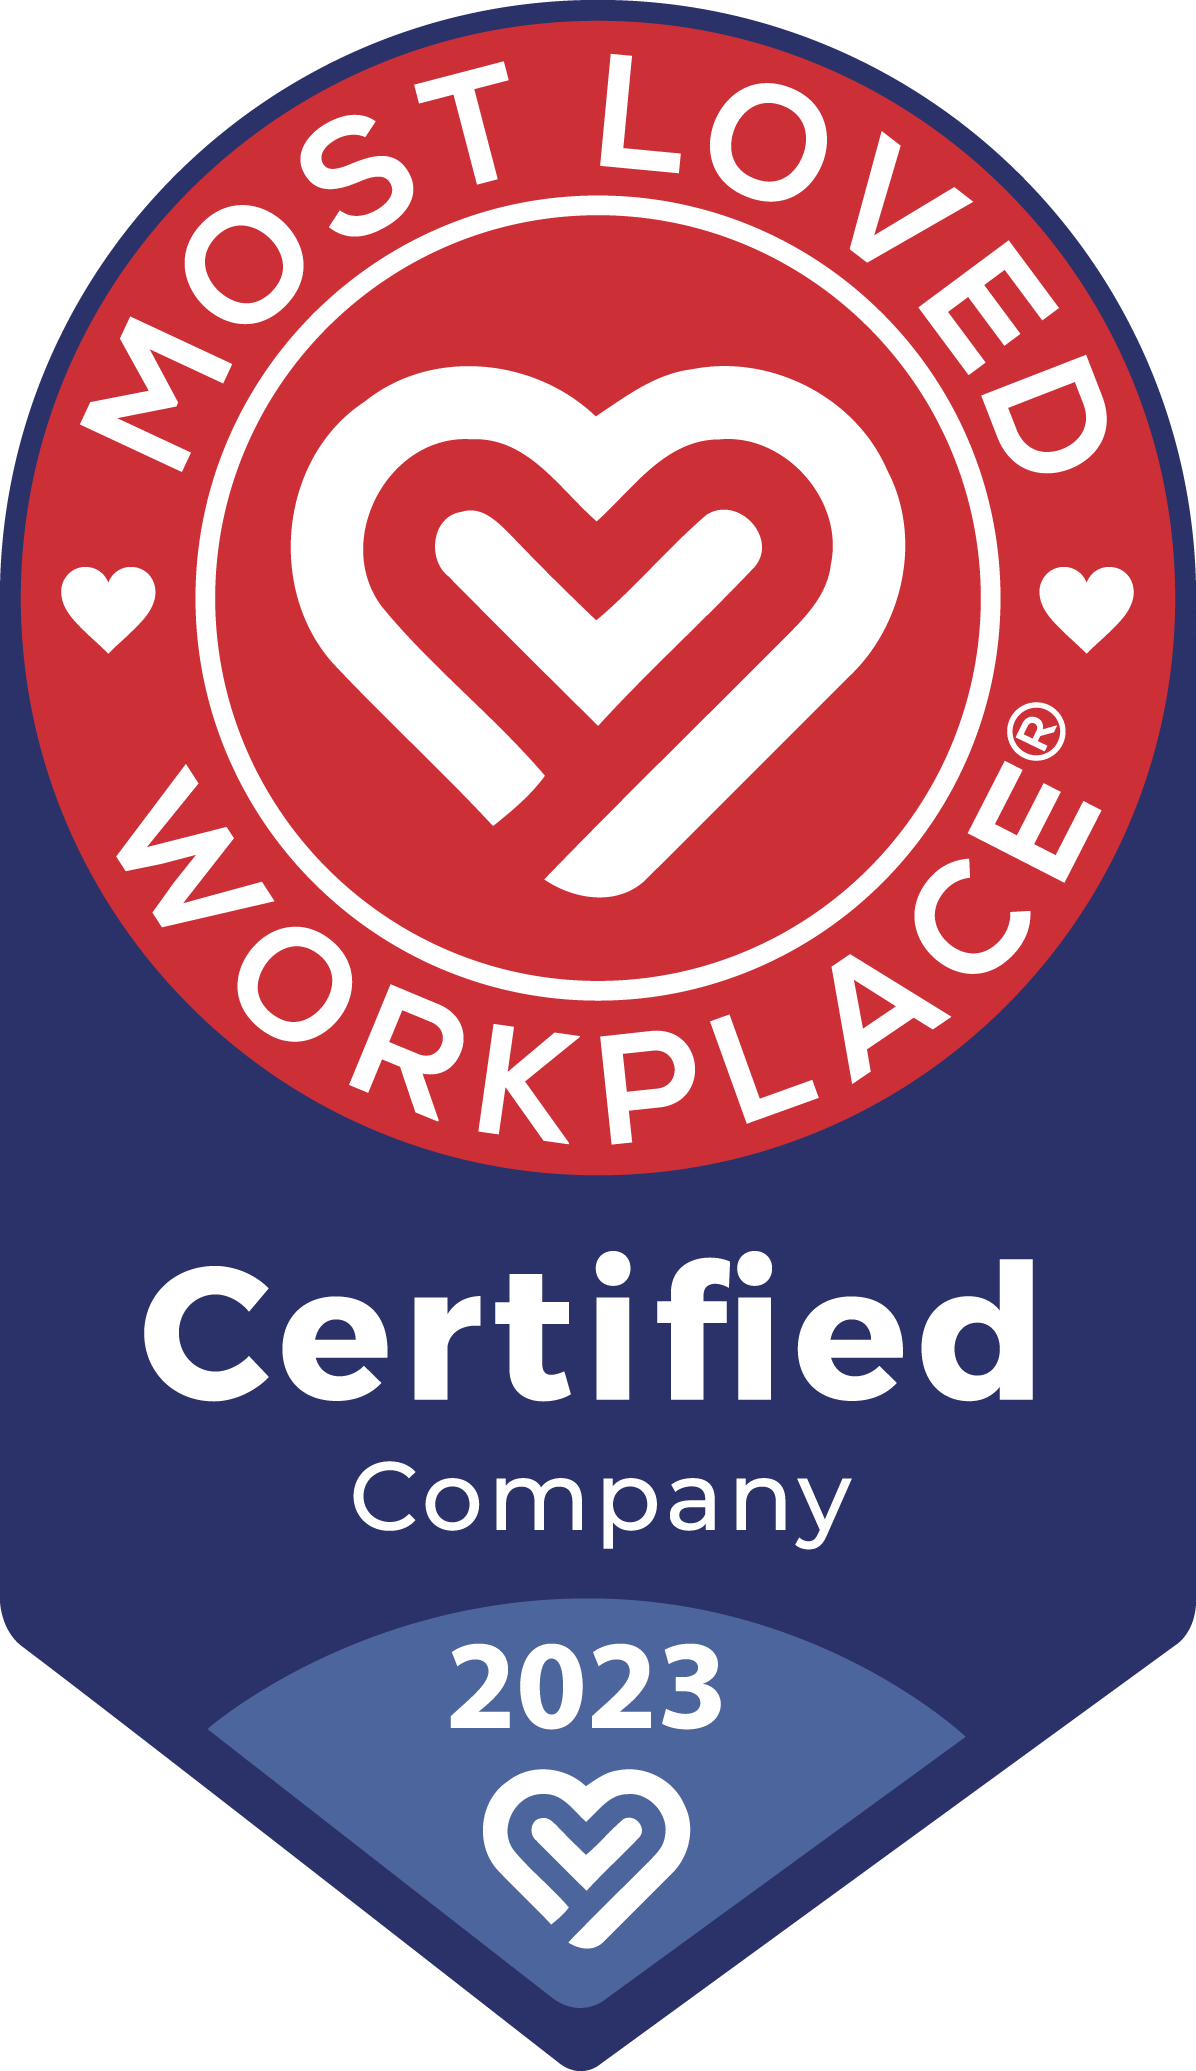 Most Loved Workplace Certified Company 2023 logo